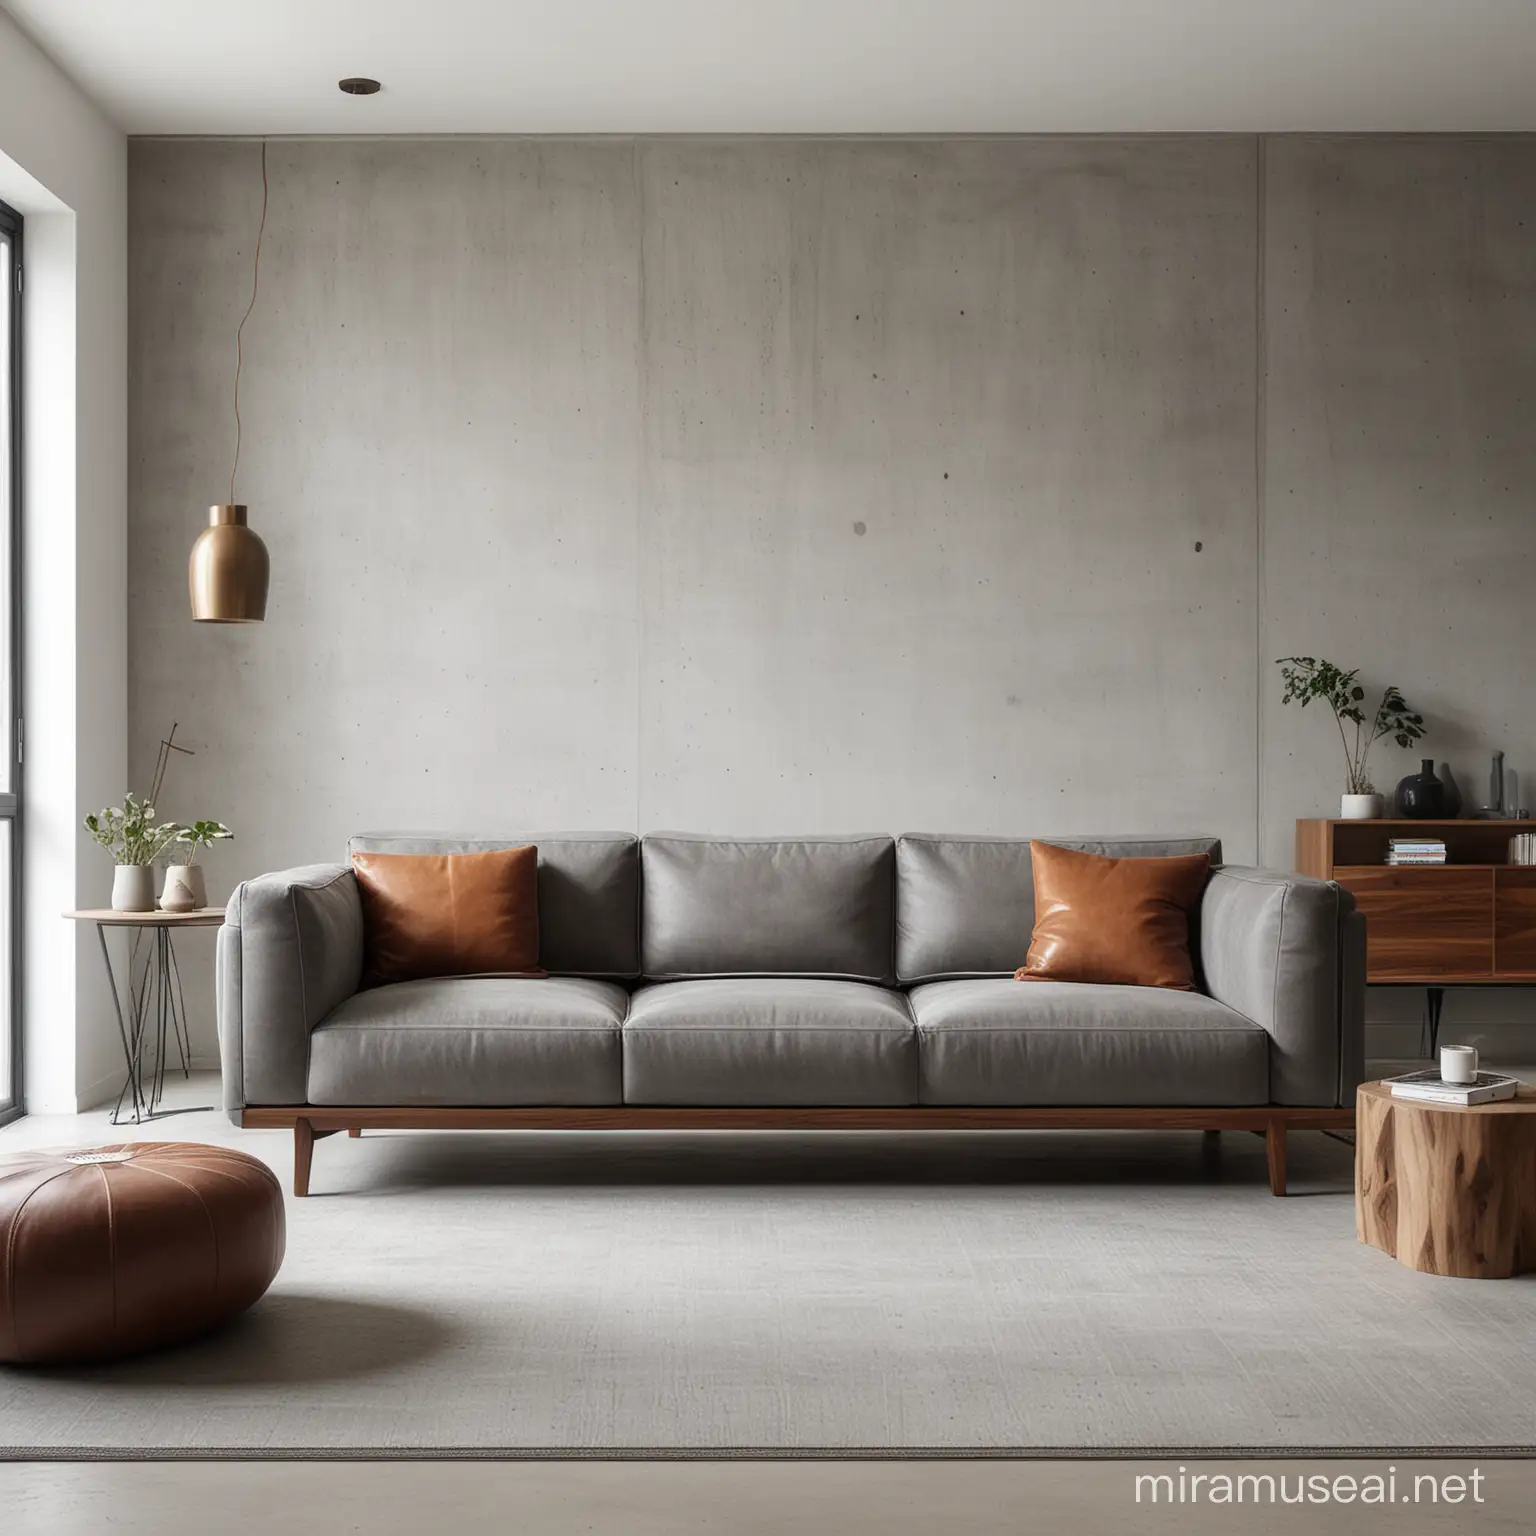 Modern Living Room with Leather Sofa in White and Walnut Tones